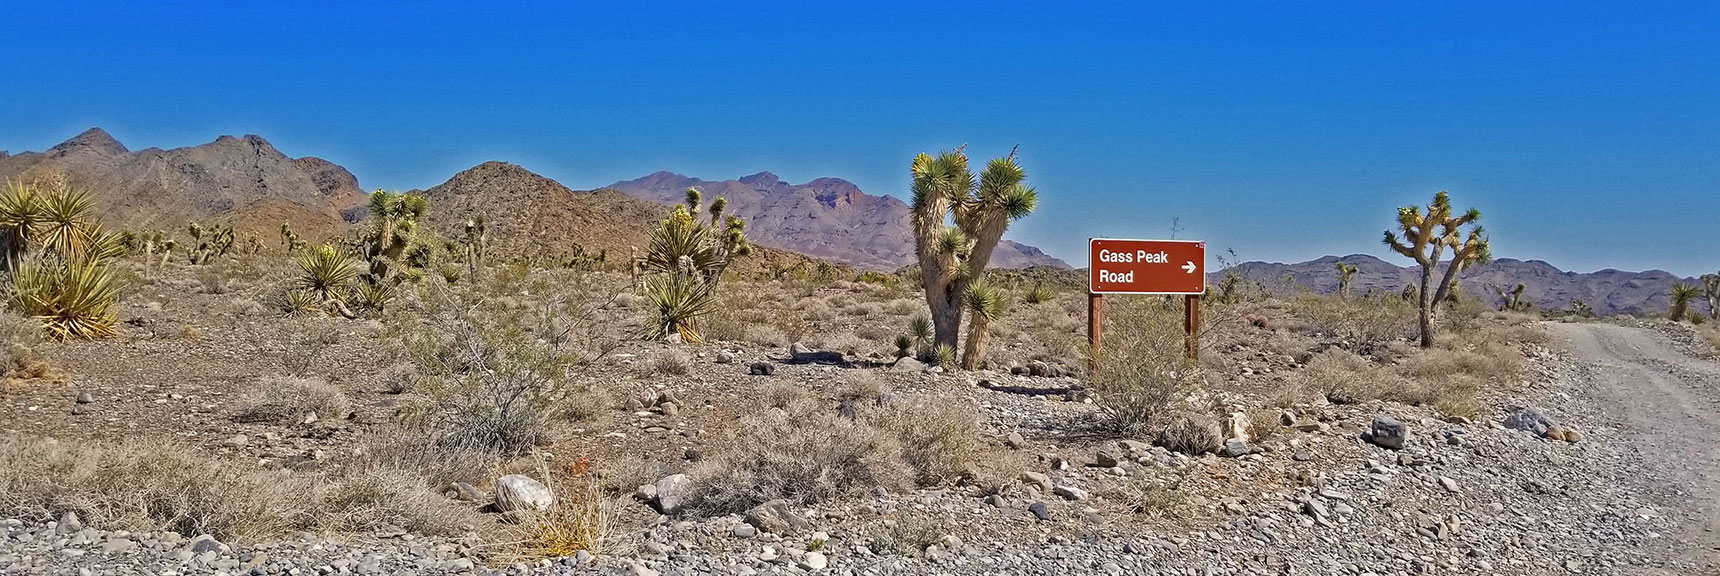 Intersection of Mormon Well Road and Gass Peak, About 5 Miles from DNWR Headquarters | Fossil Ridge End to End | Sheep Range | Desert National Wildlife Refuge, Nevada